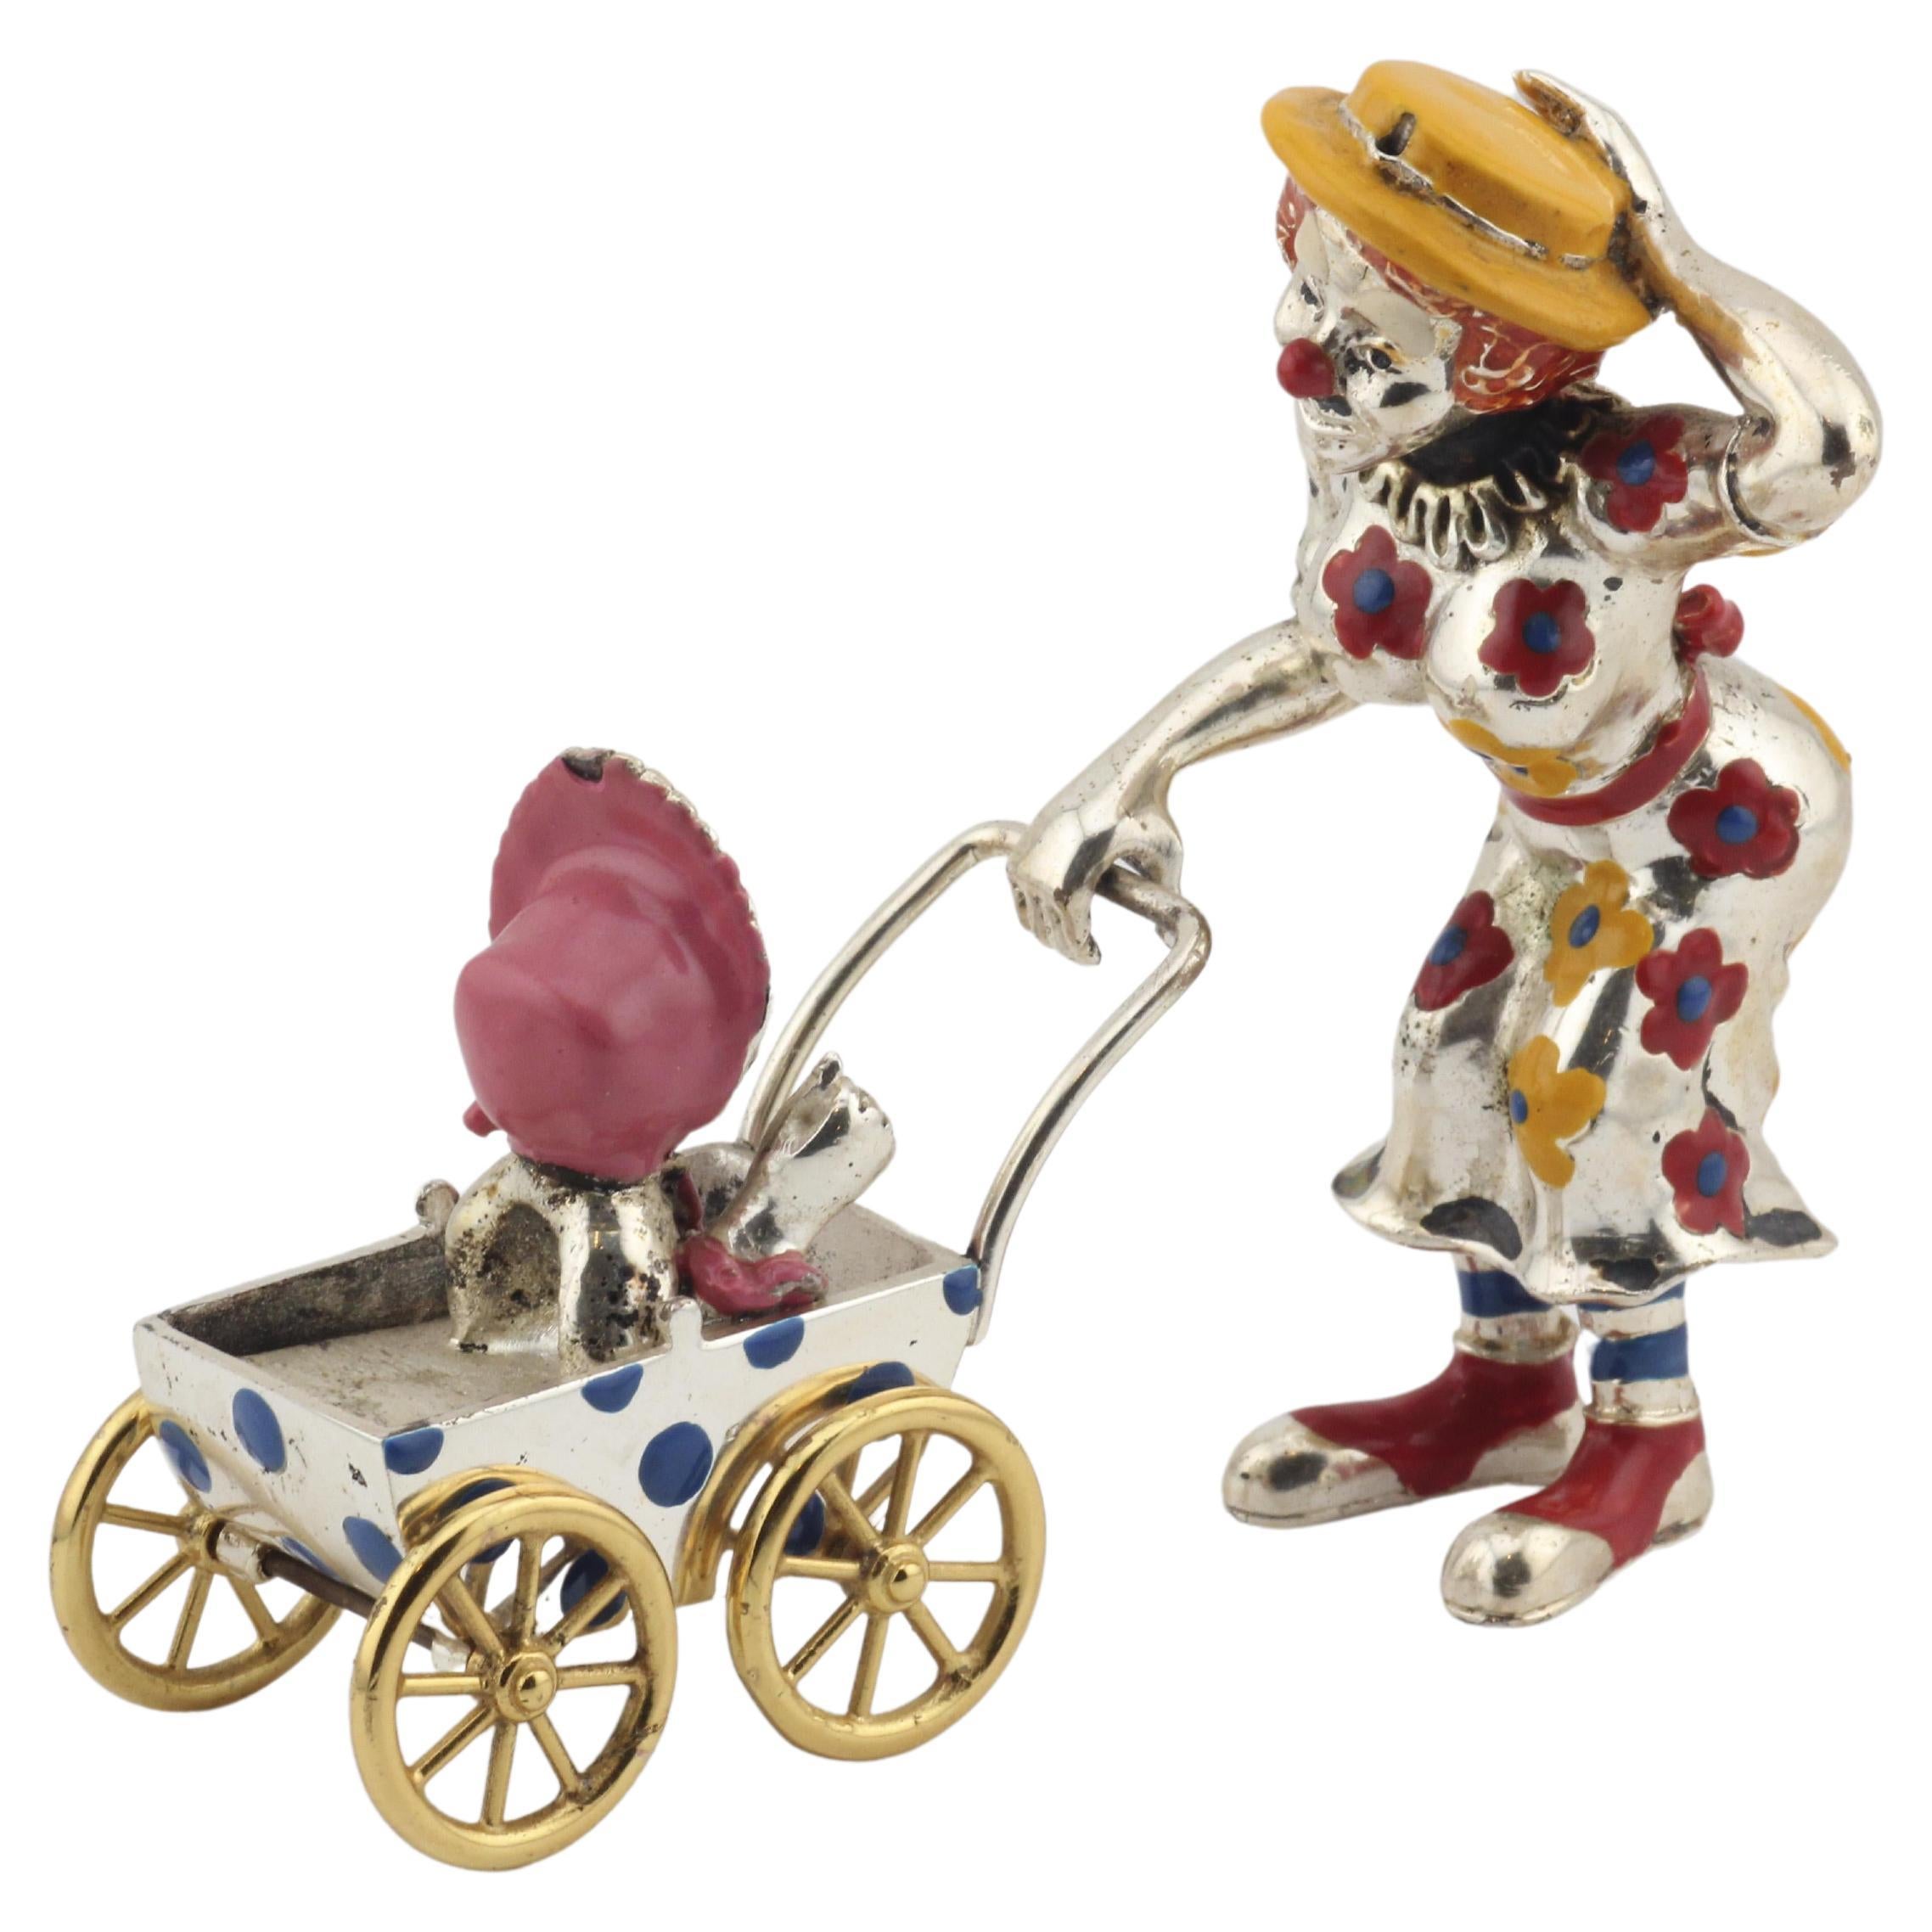 Tiffany & Co. Silver & Enamel Circus Clown Mother & Baby in Carriage Figurine